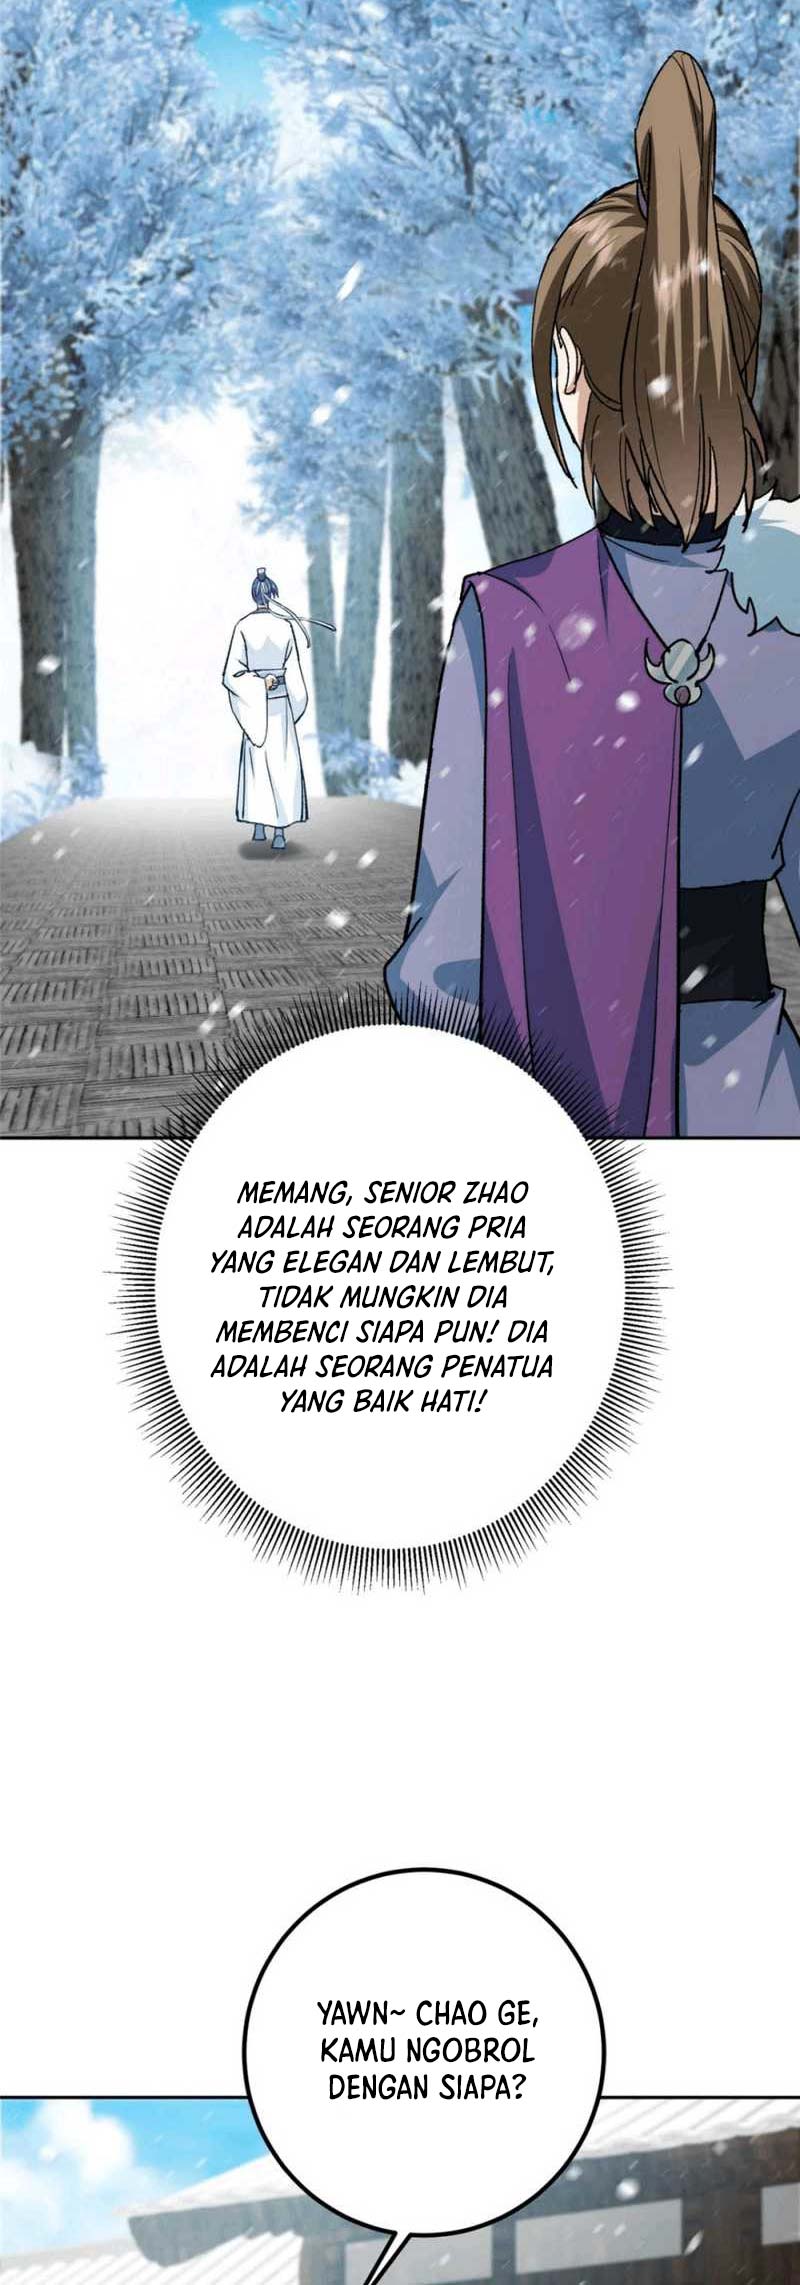 Keep A Low Profile, Sect Leader Chapter 274 Image 10